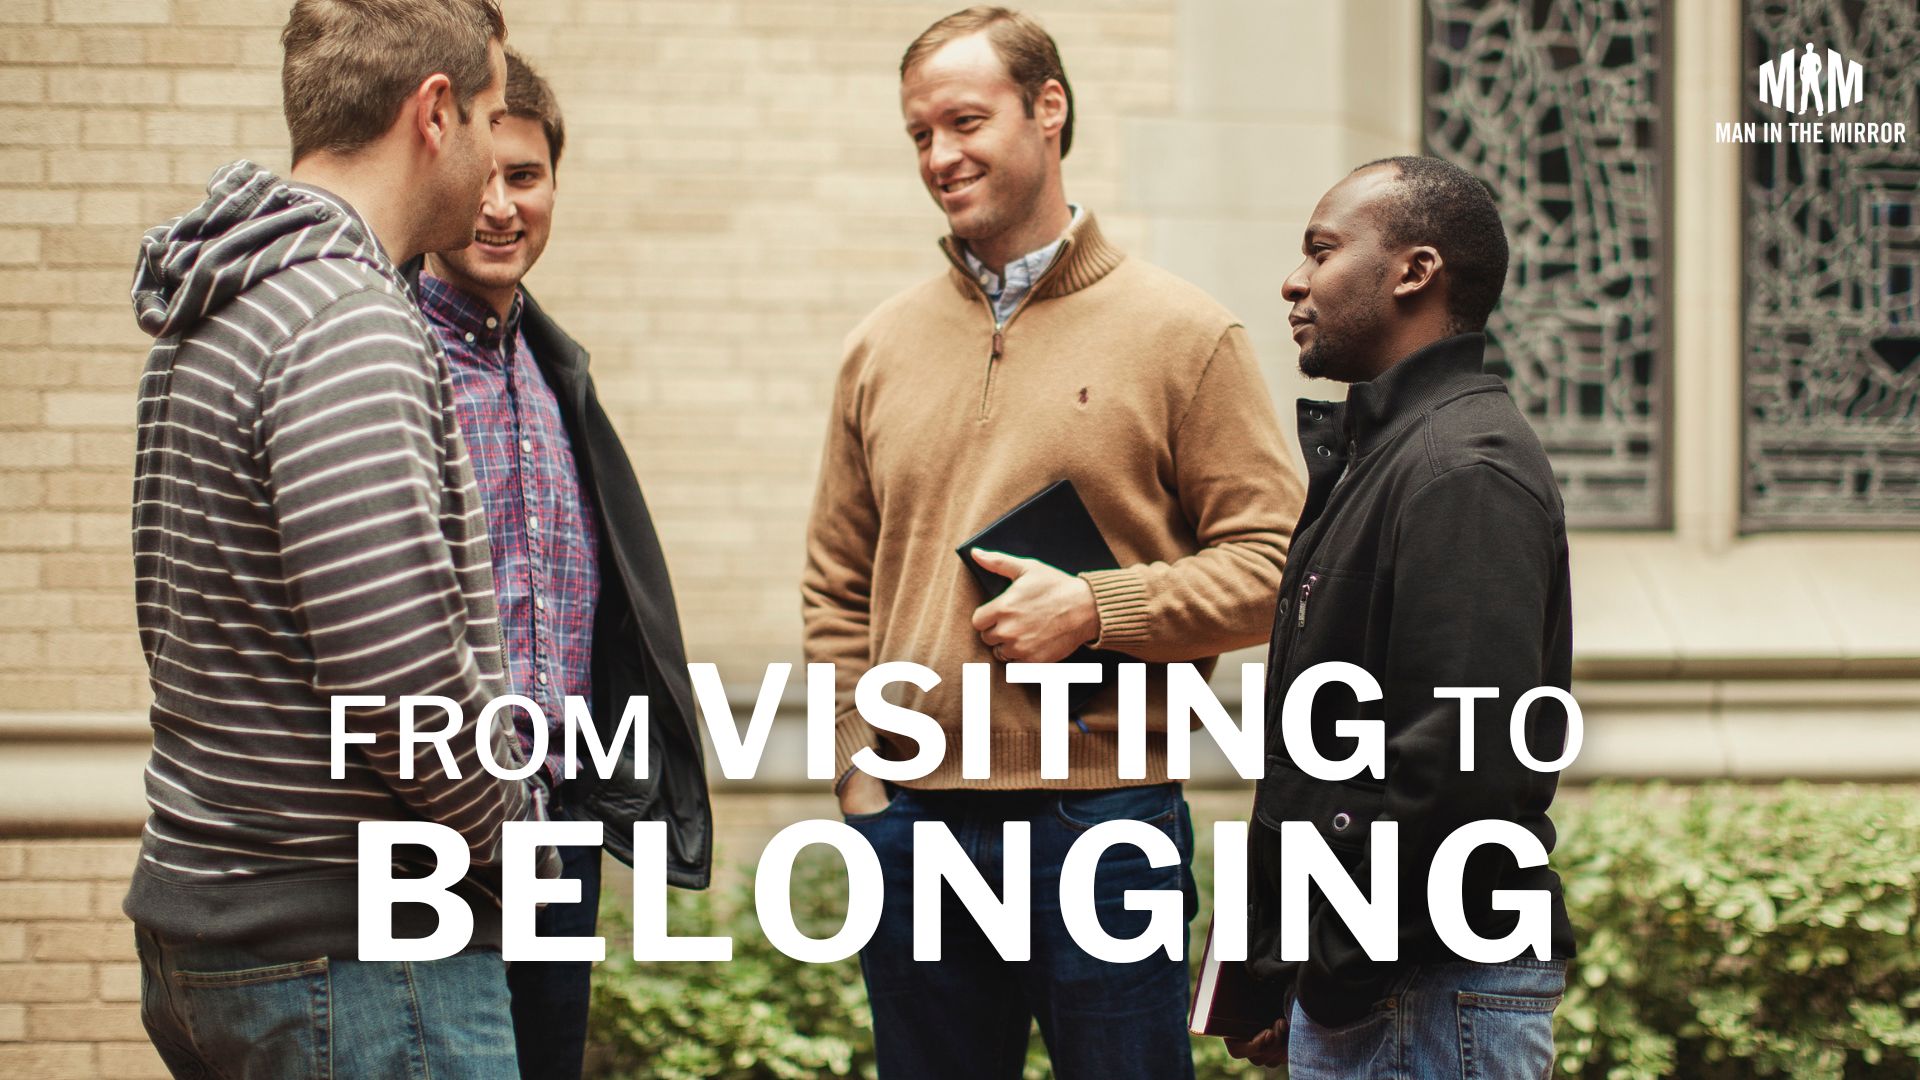 From Visiting to Belonging - group of men at church talking and joking around